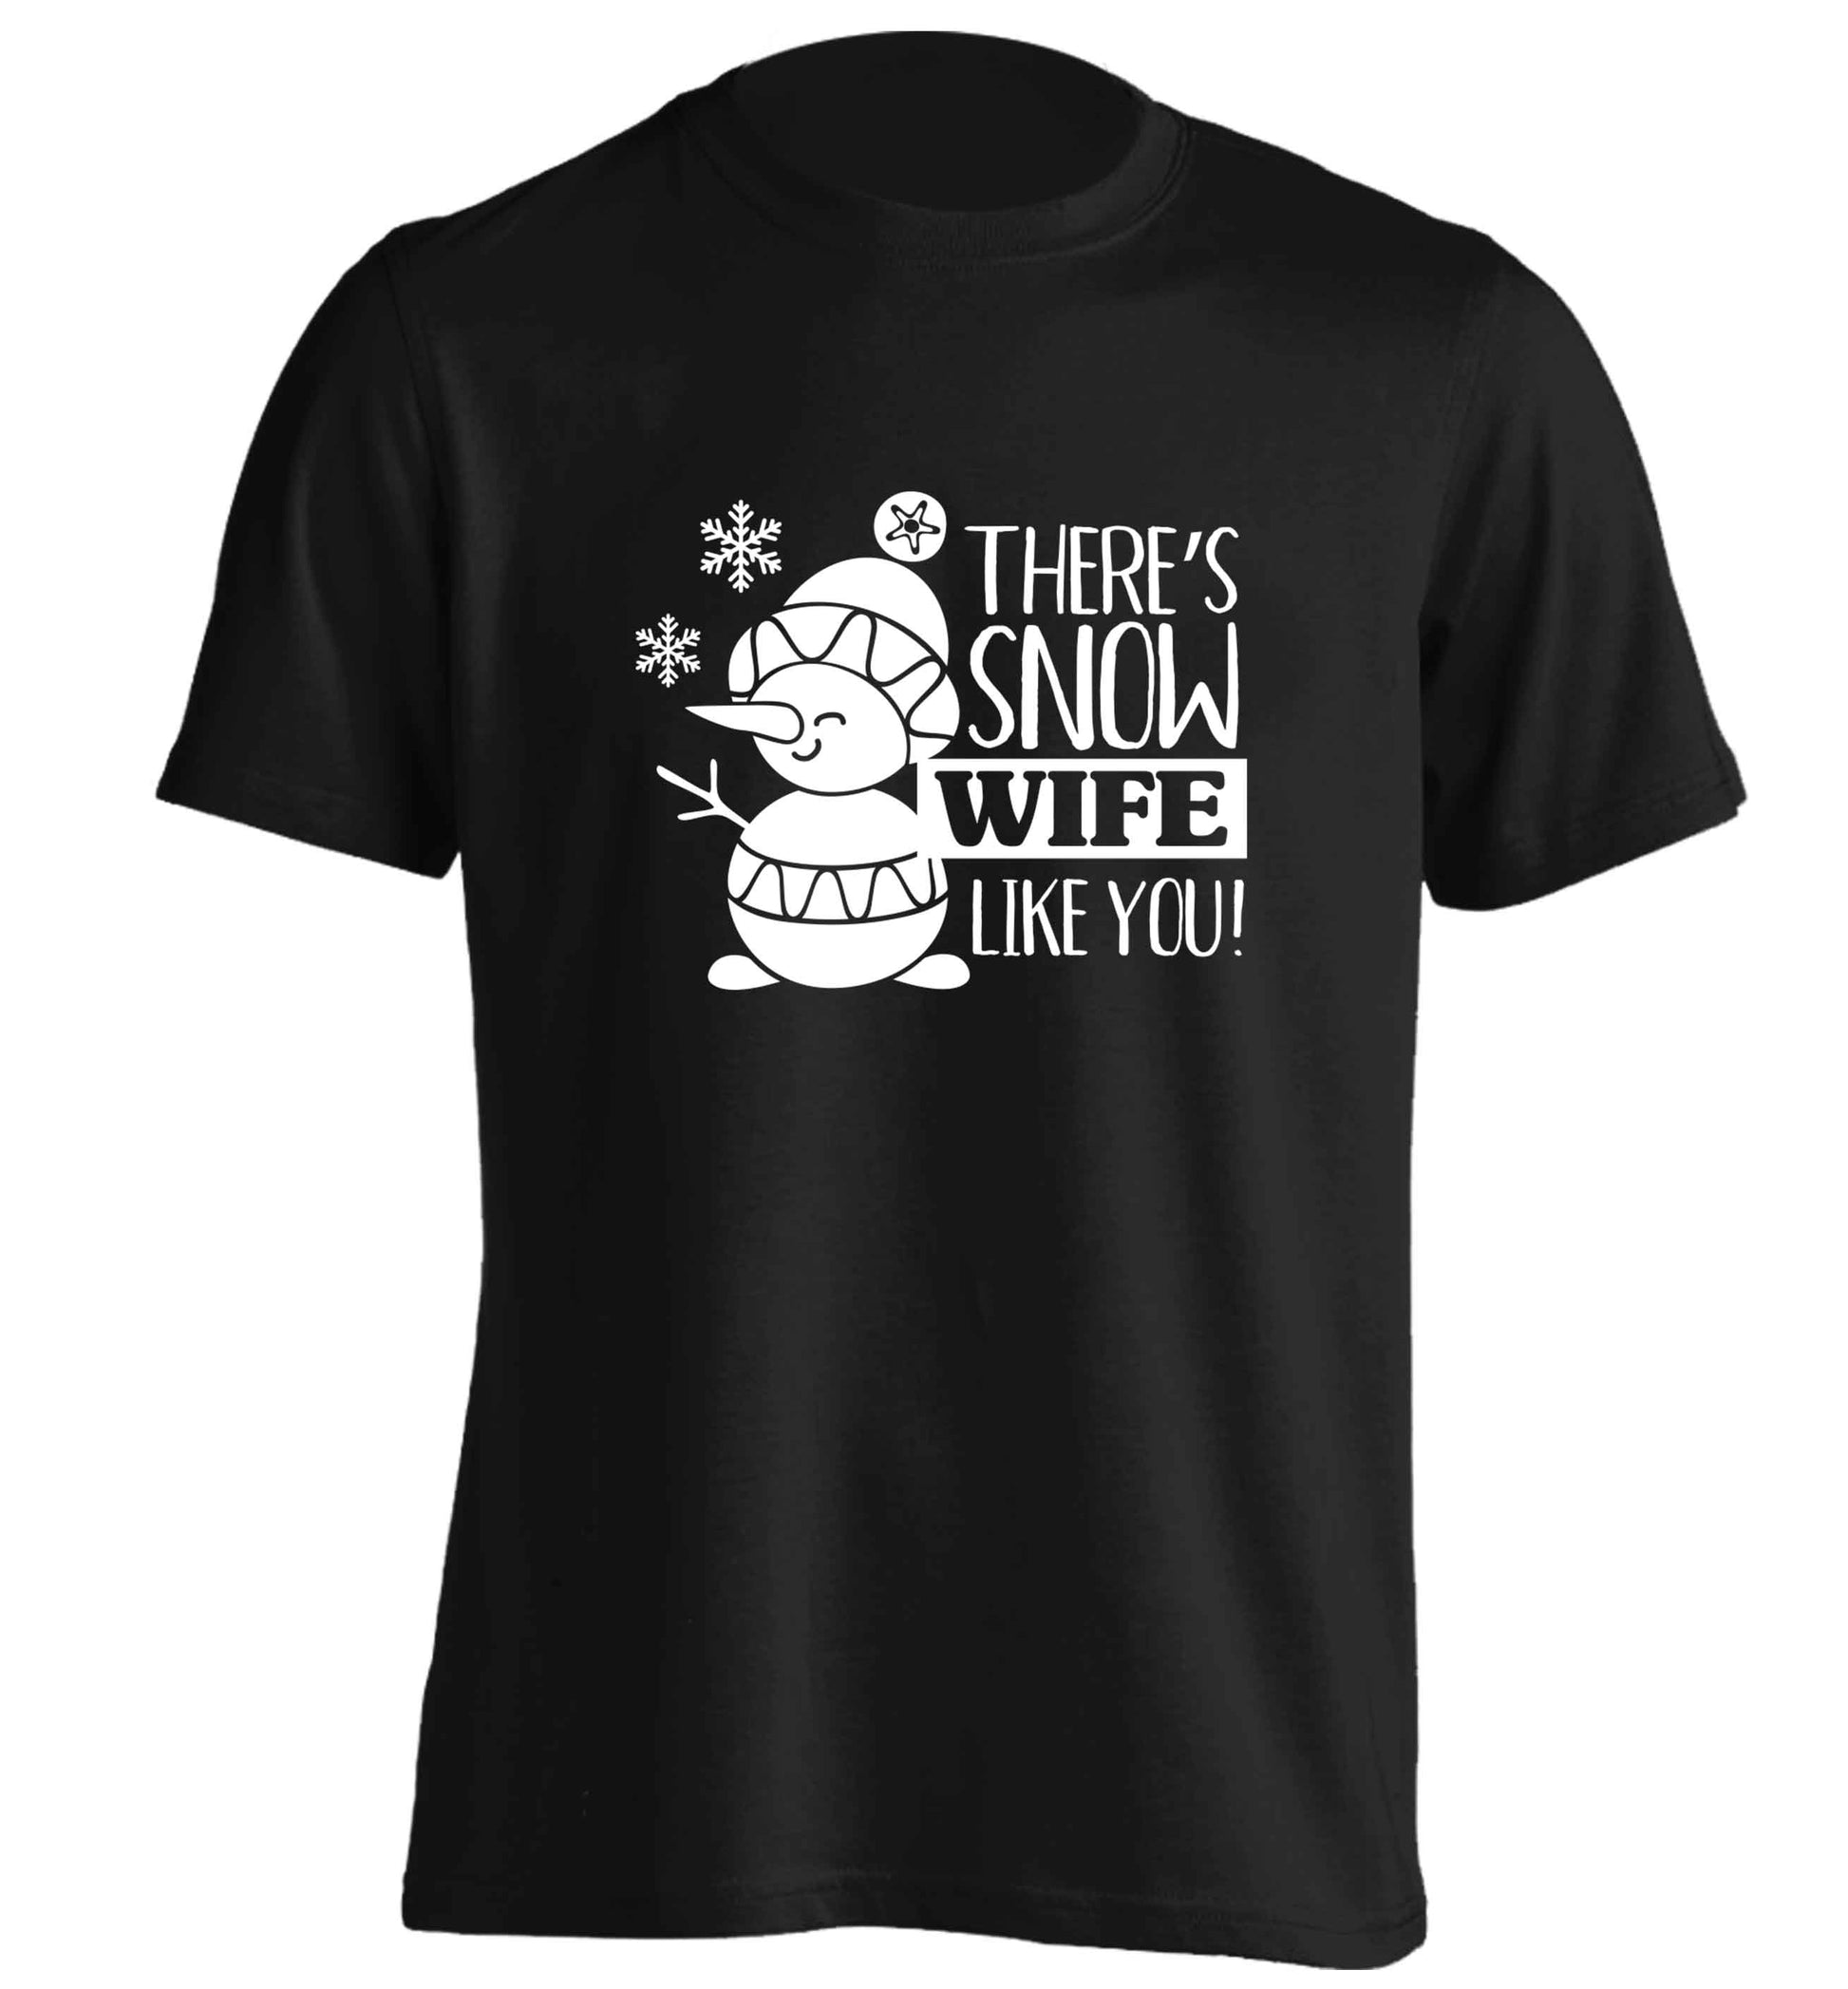 There's snow wife like you adults unisex black Tshirt 2XL